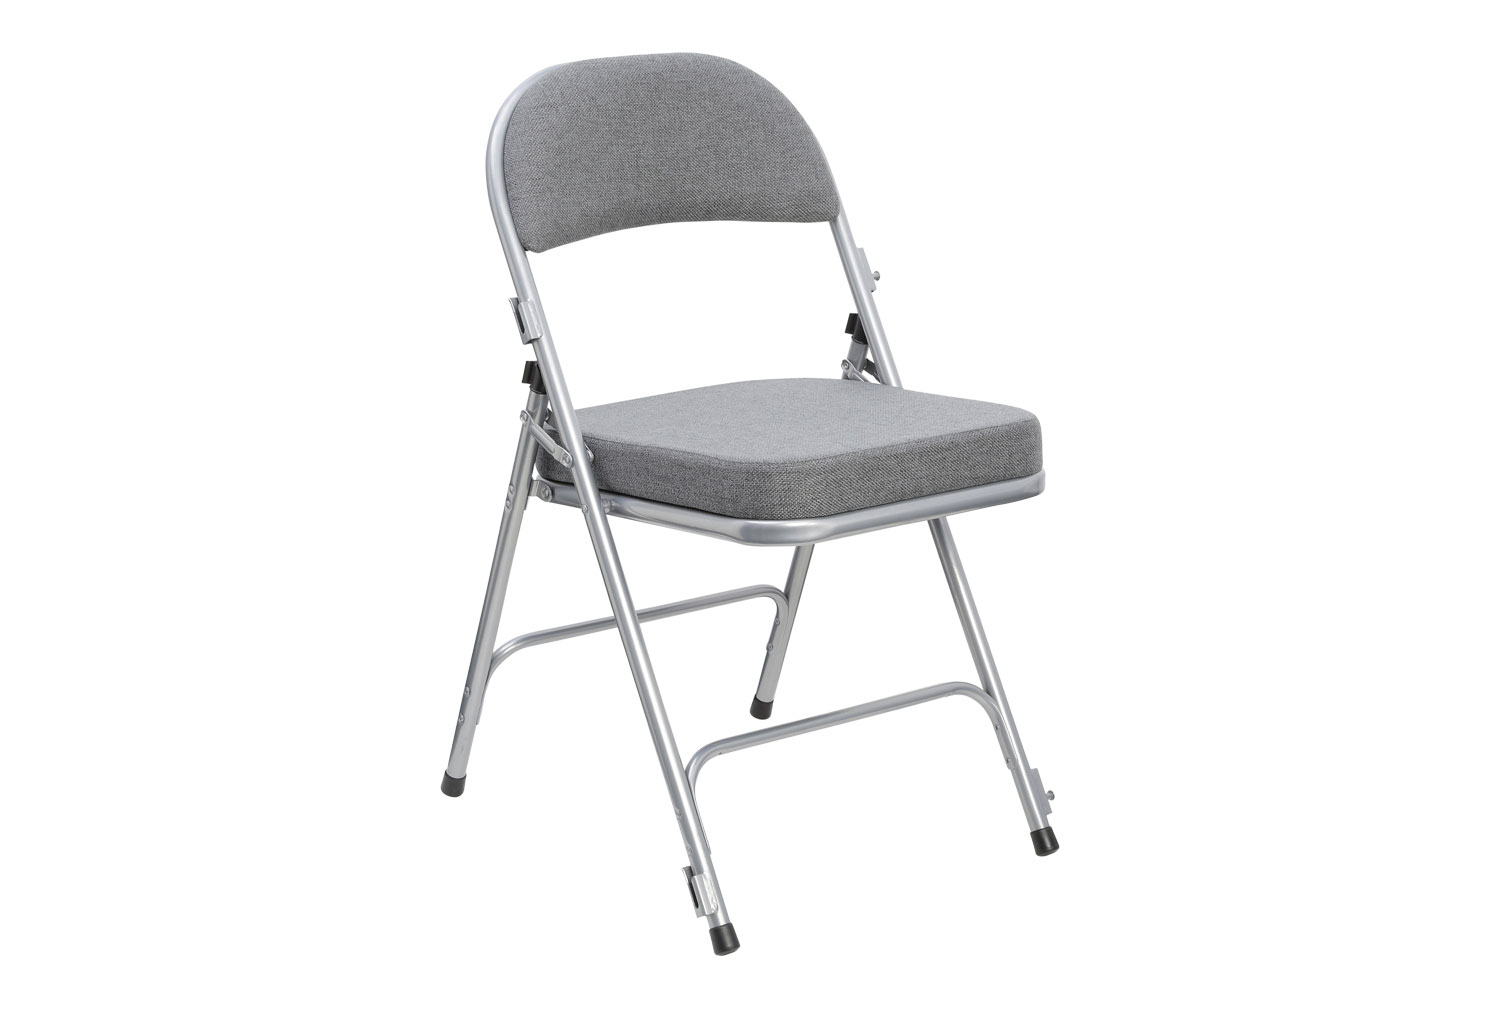 Pack Of 4 Deluxe Upholstered Folding Chairs